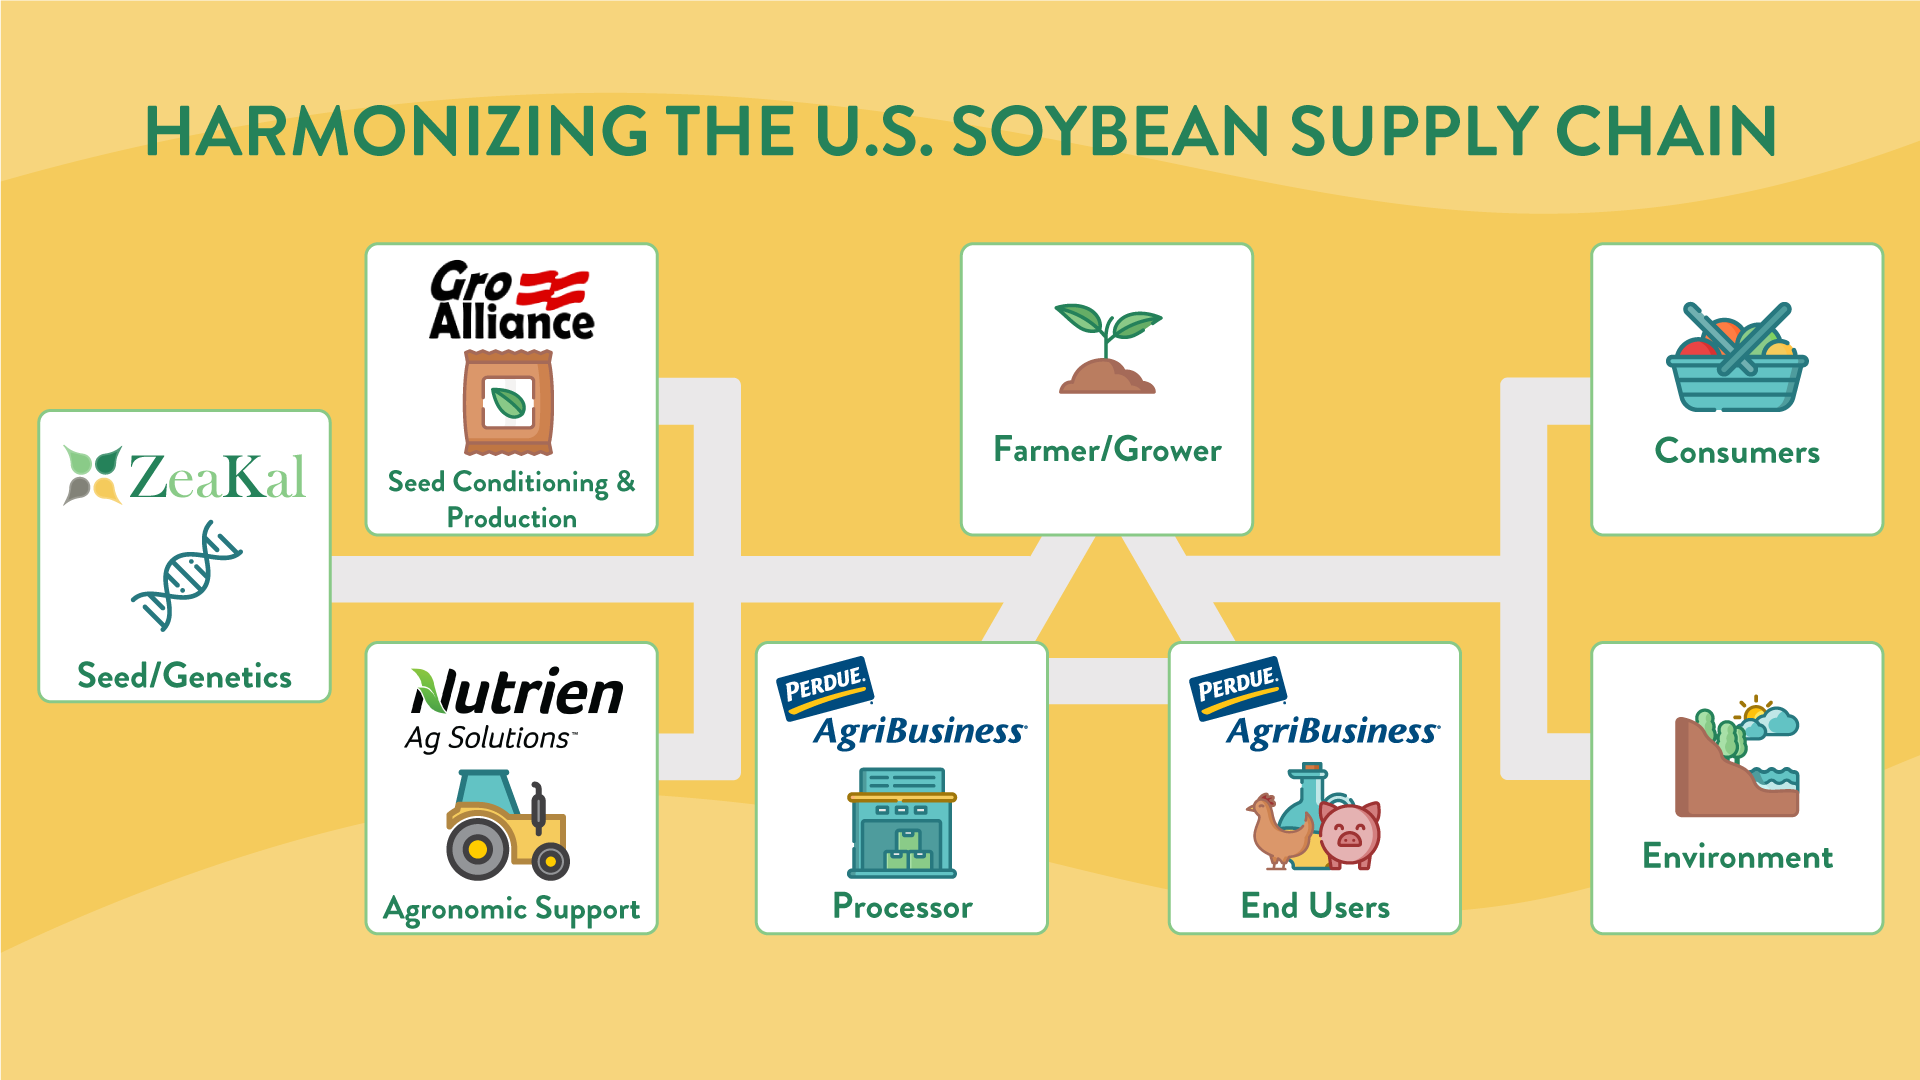 ZeaKal&#39;s announcement with Nutrien Ag Solutions completes the loop of ZeaKals NewType agriculture model, bringing multiple supply chain collaborators to the same table in a first-of-its-kind strategic collaboration that connects genetics in the field to the entire soybean value chain.